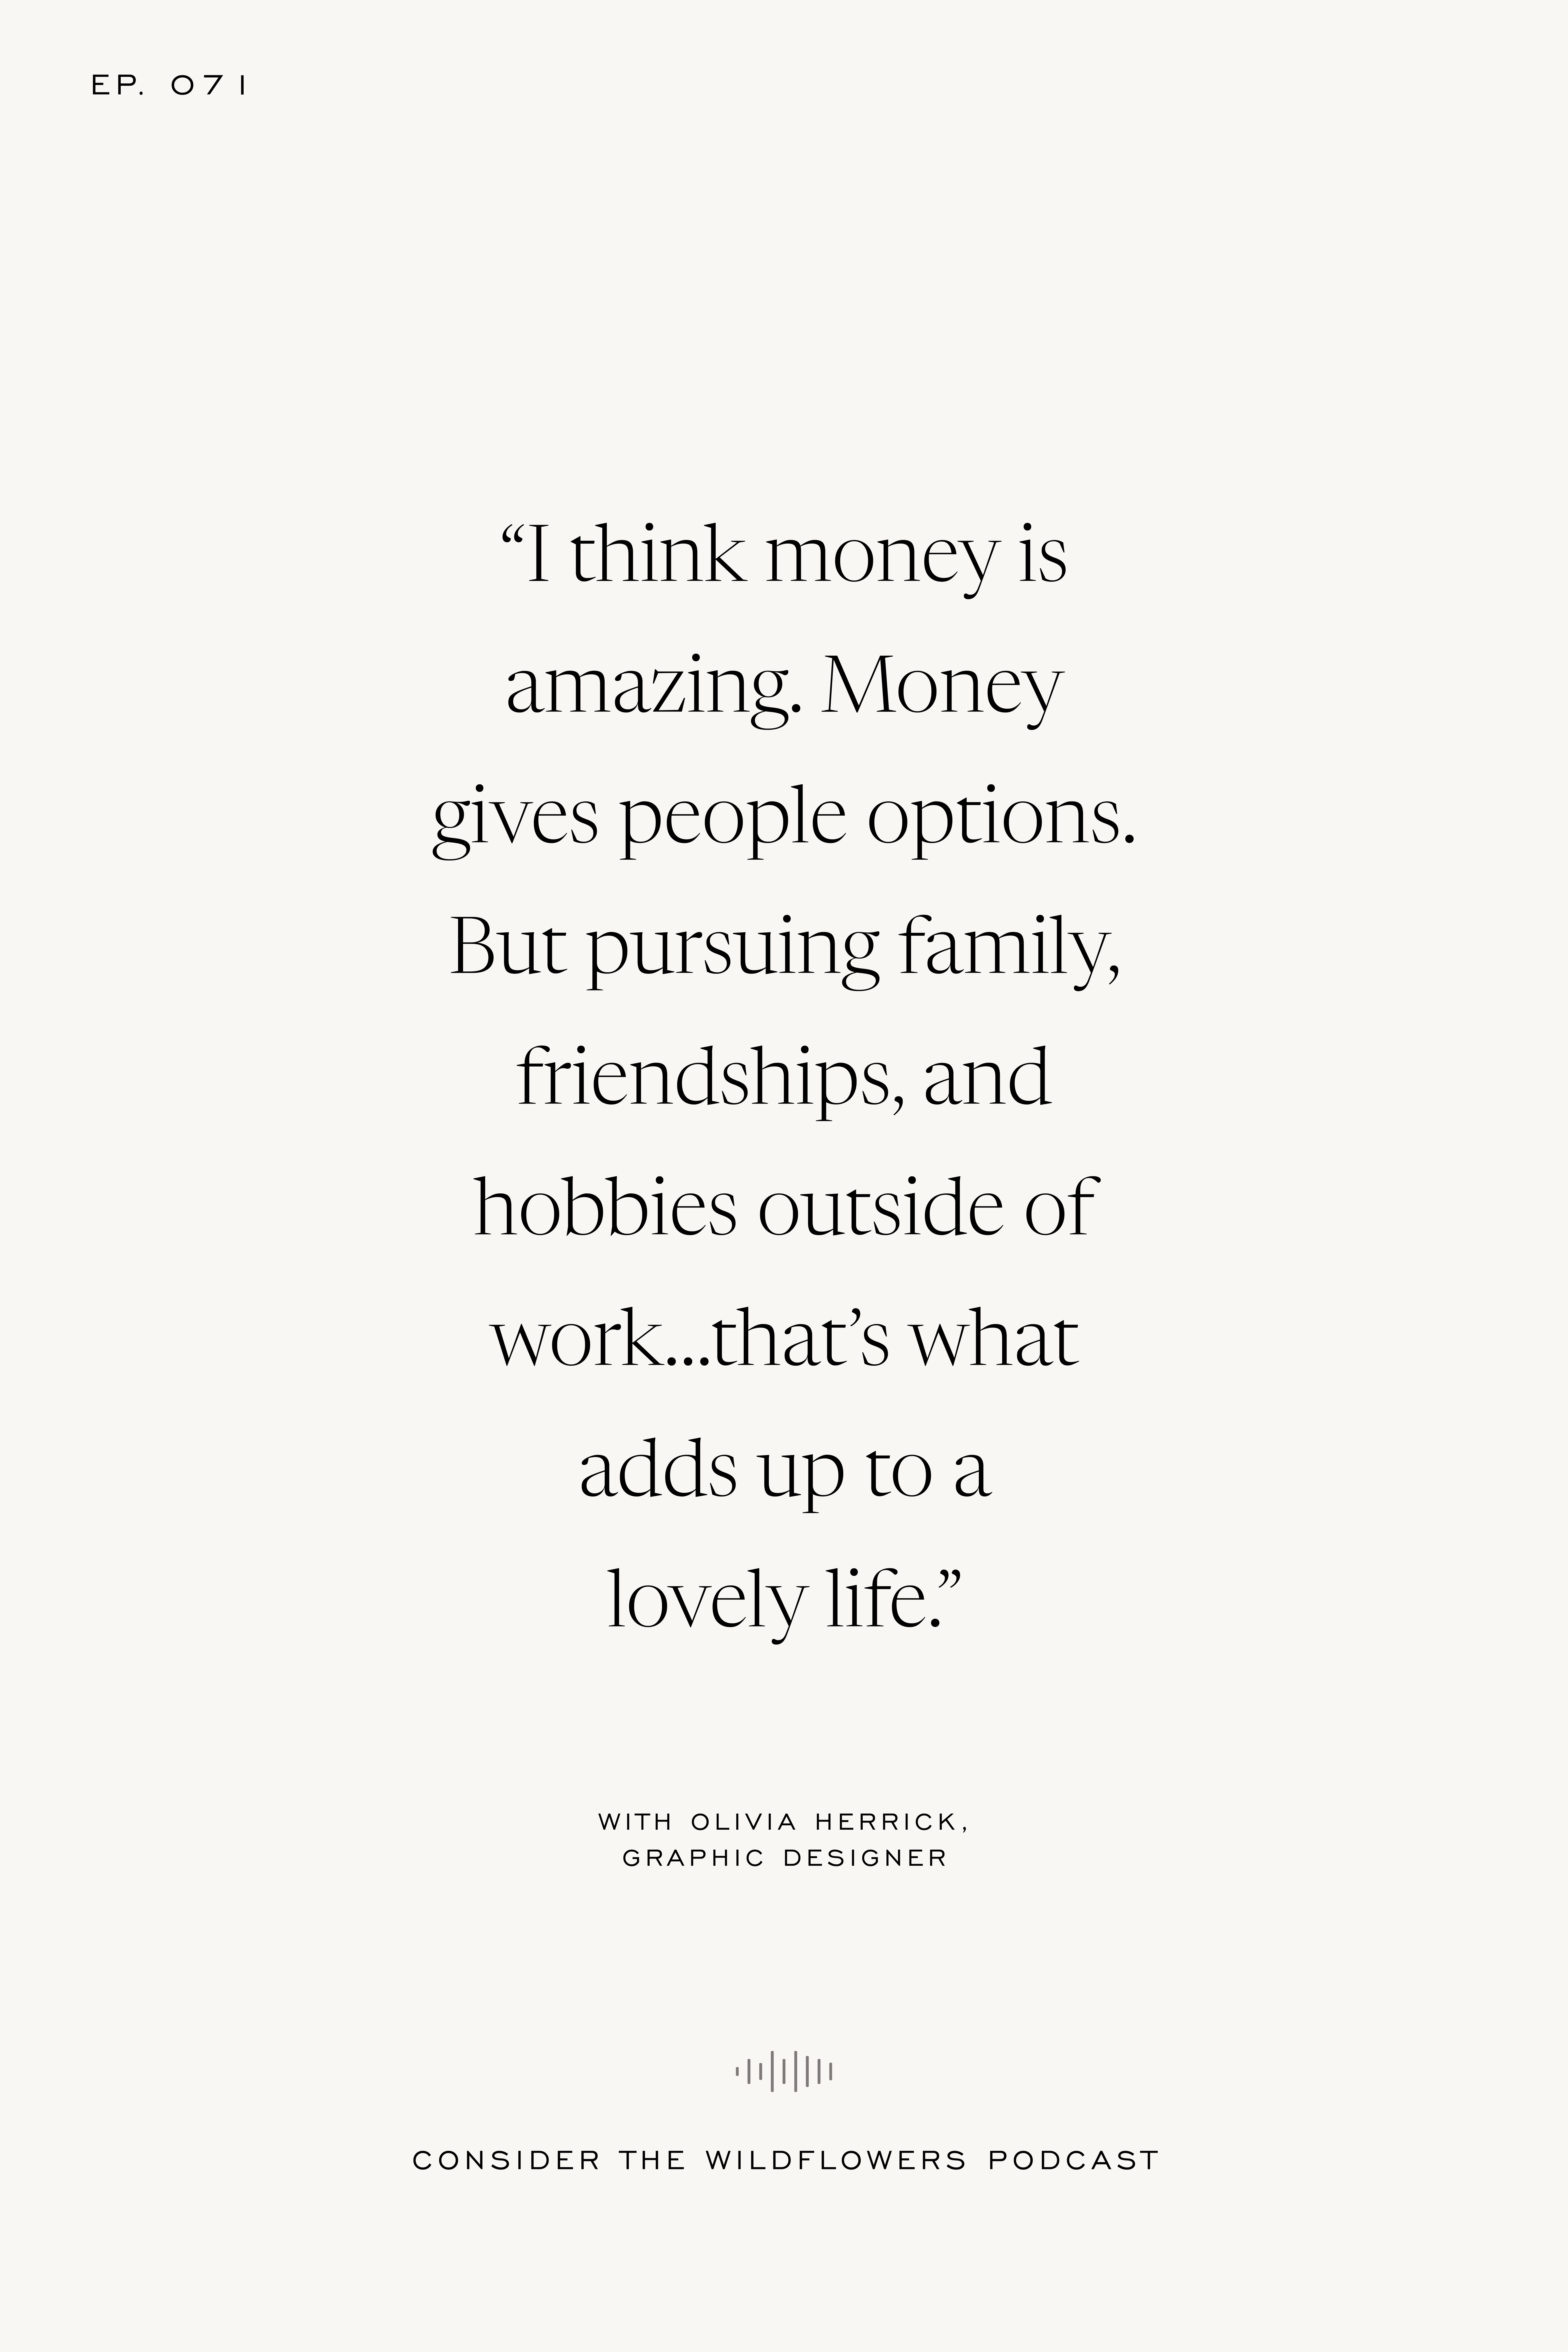 Cream Background with Quote: "I think money is amazing. Money gives people options. But pursuing family, friendships, and hobbies outside of work…that’s what adds up to a lovely life." -Olivia Herrick